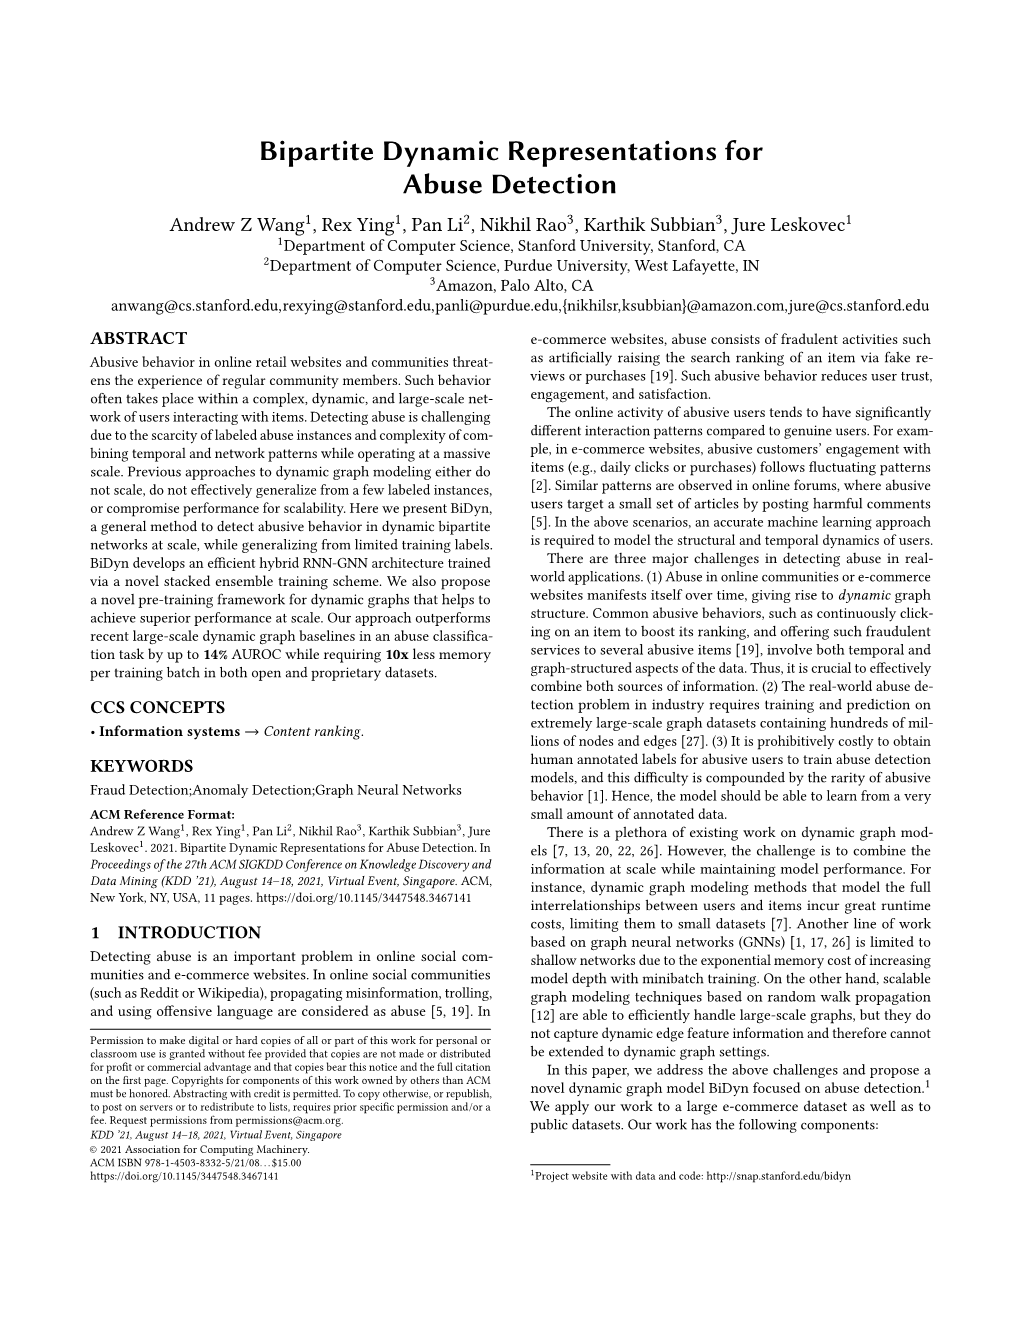 Bipartite Dynamic Representations for Abuse Detection